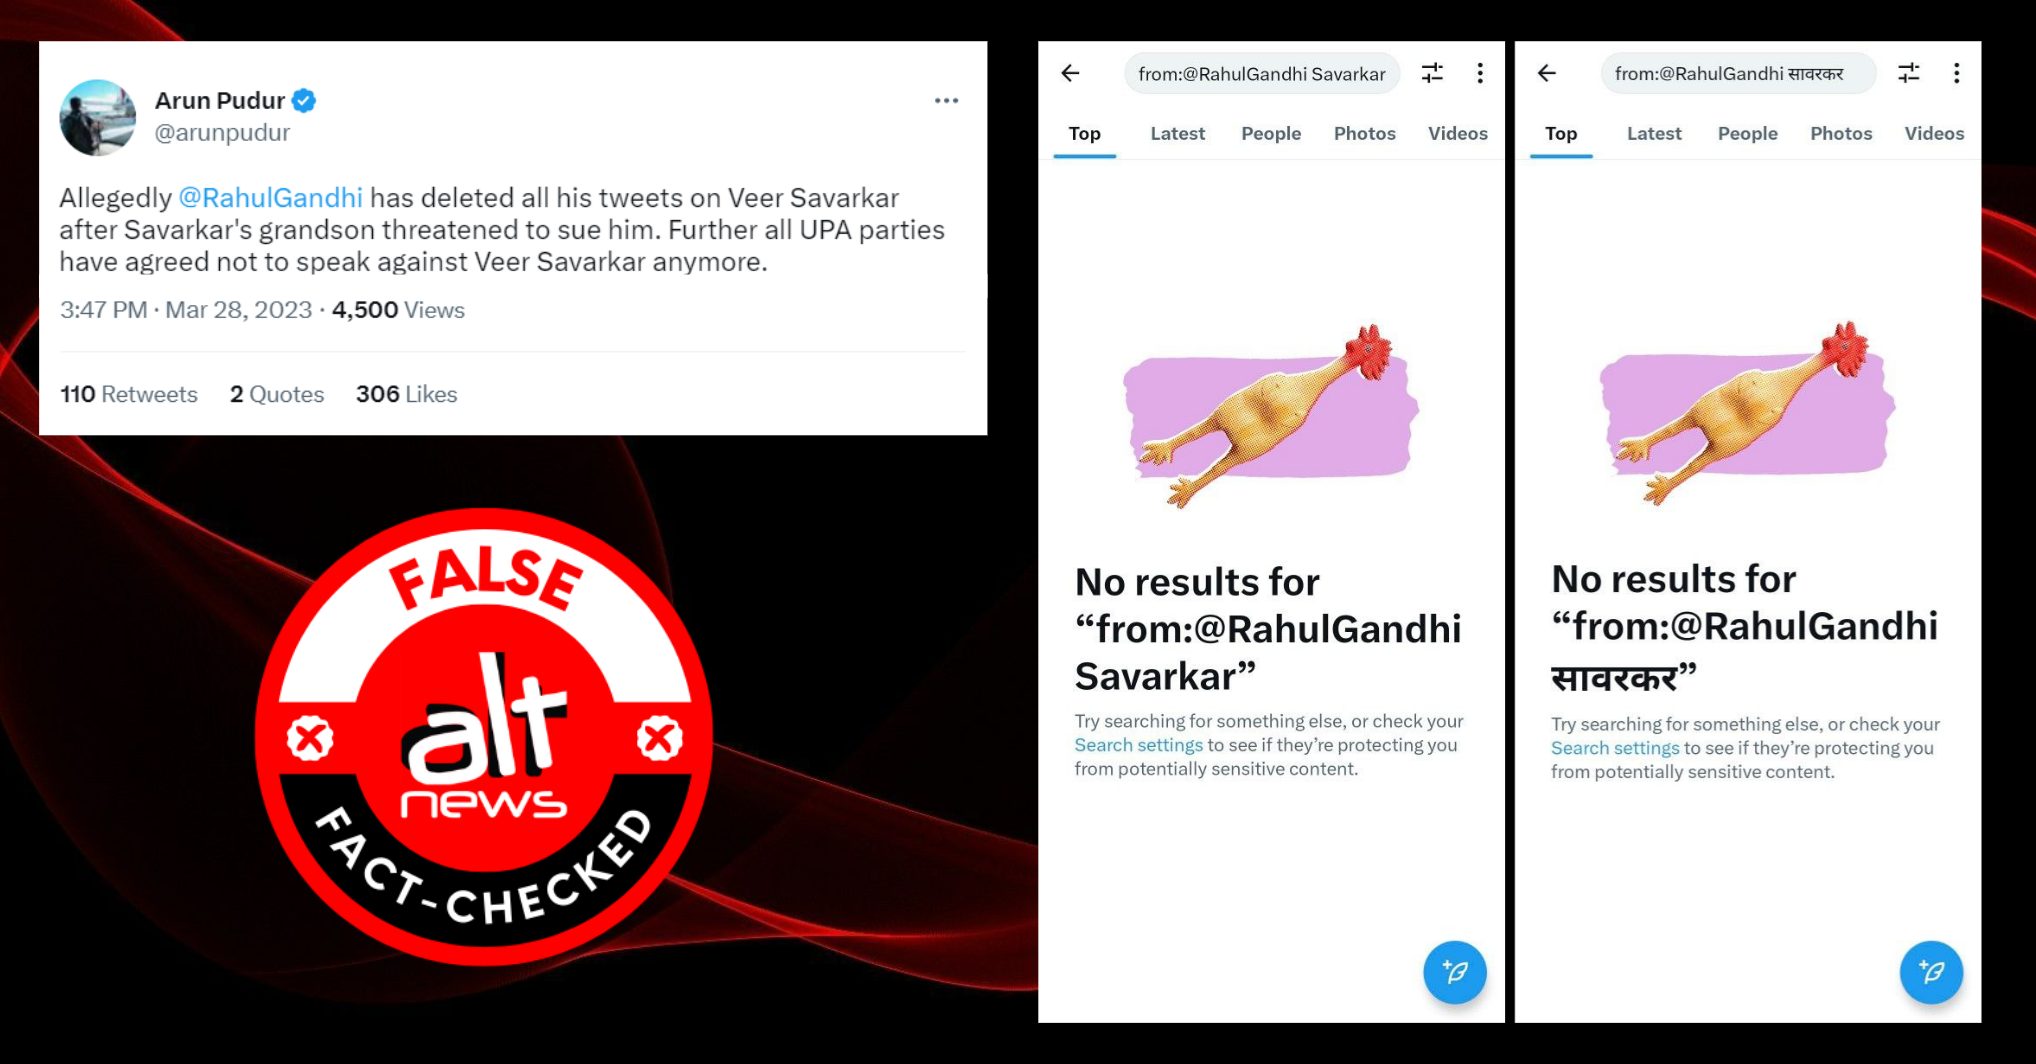 Right Wing users falsely claim Rahul Gandhi deleted Savarkar tweets, then delete their own tweets - Alt News